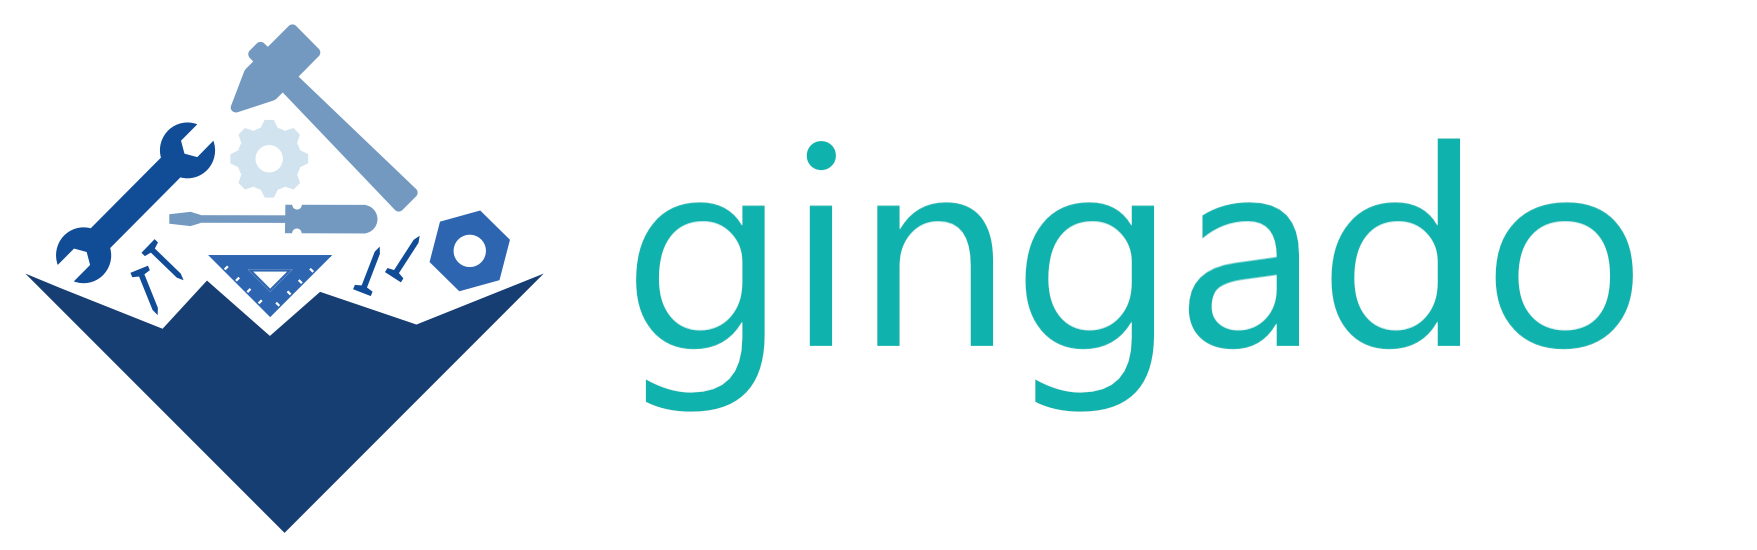 New tool launched - gingado